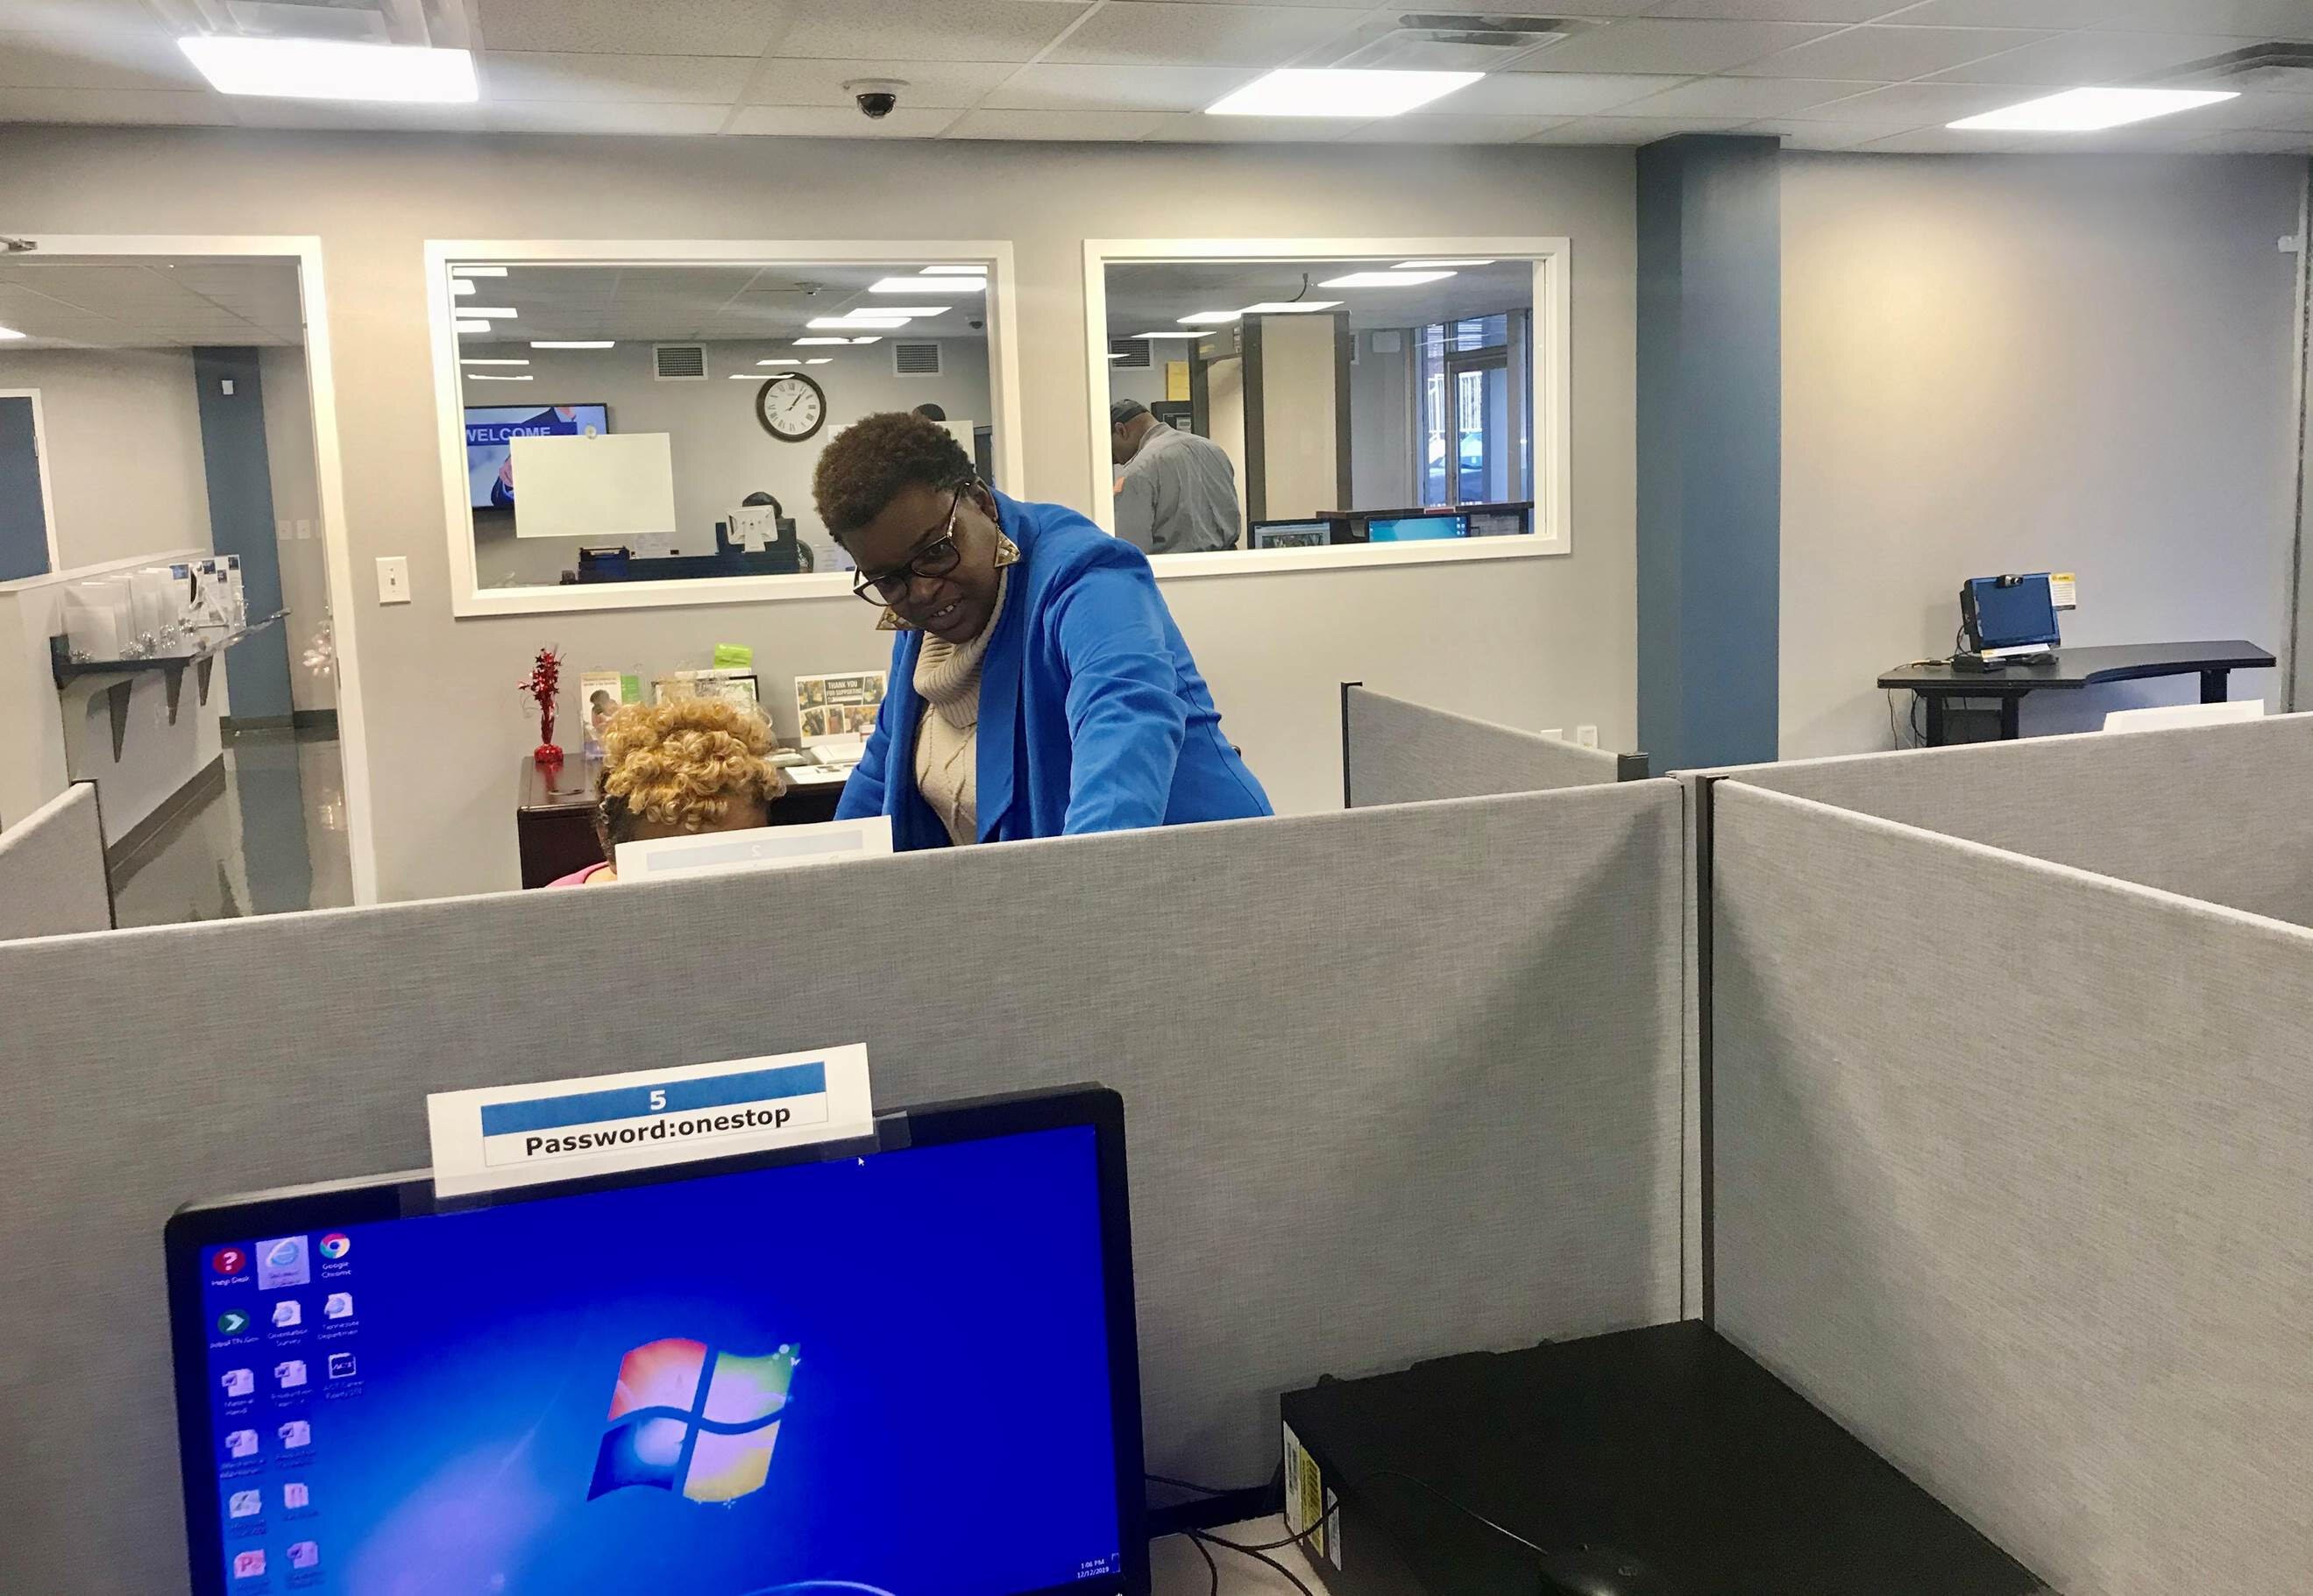 Tameka D. Greer, project director for the Career Advantage Youth Program assists a young person in an online job hunt. The program works with people ages 16 to 24 to identify and manifest their professional goals. (Felicia Christian)